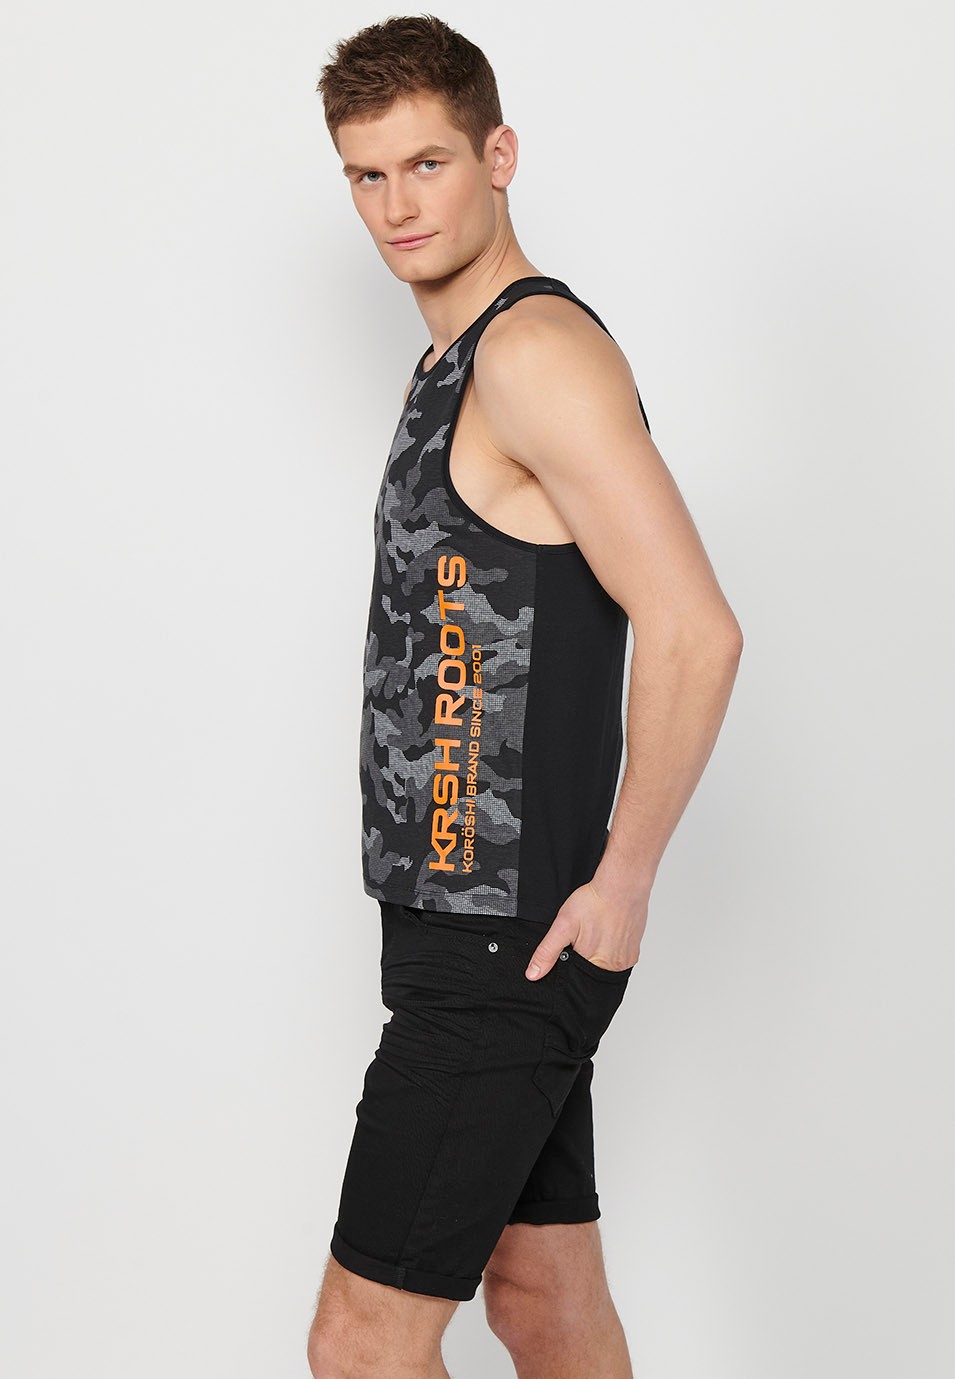 Tank top, black and gray camouflage print for men